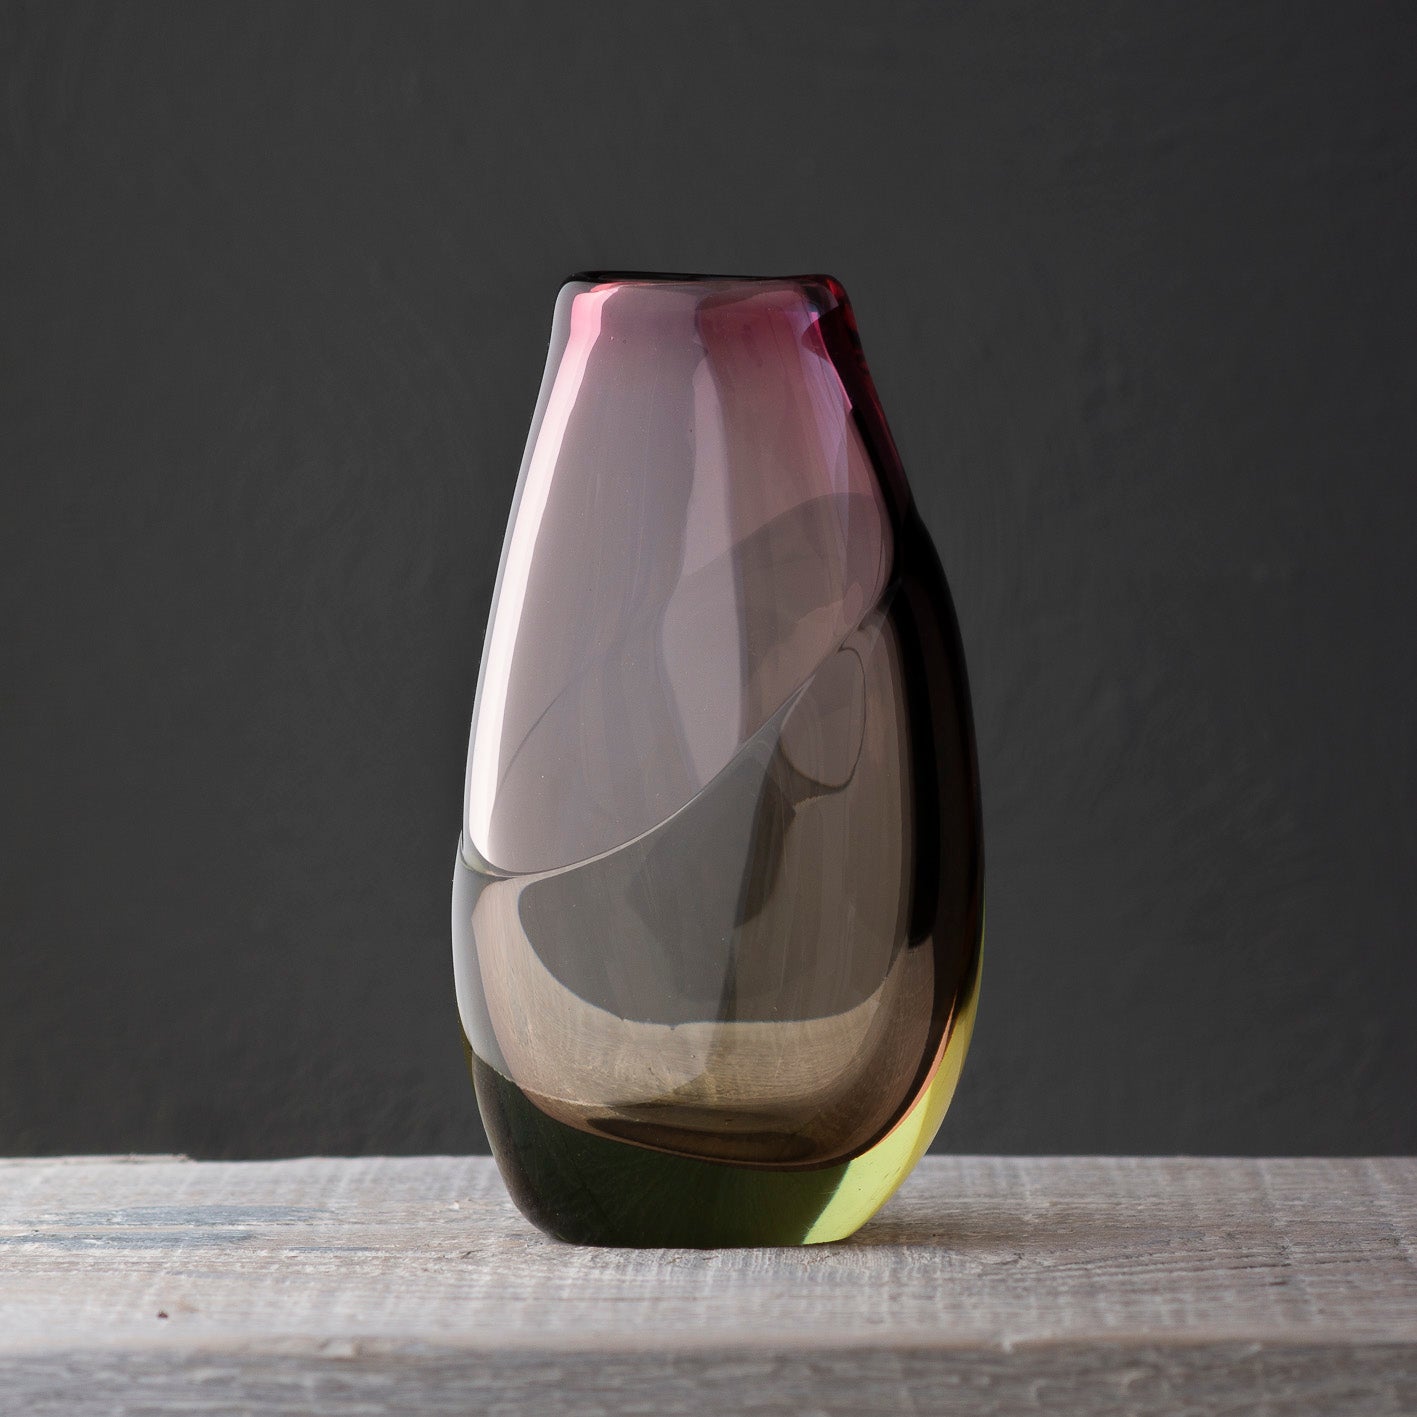 Dipped vases, 2020